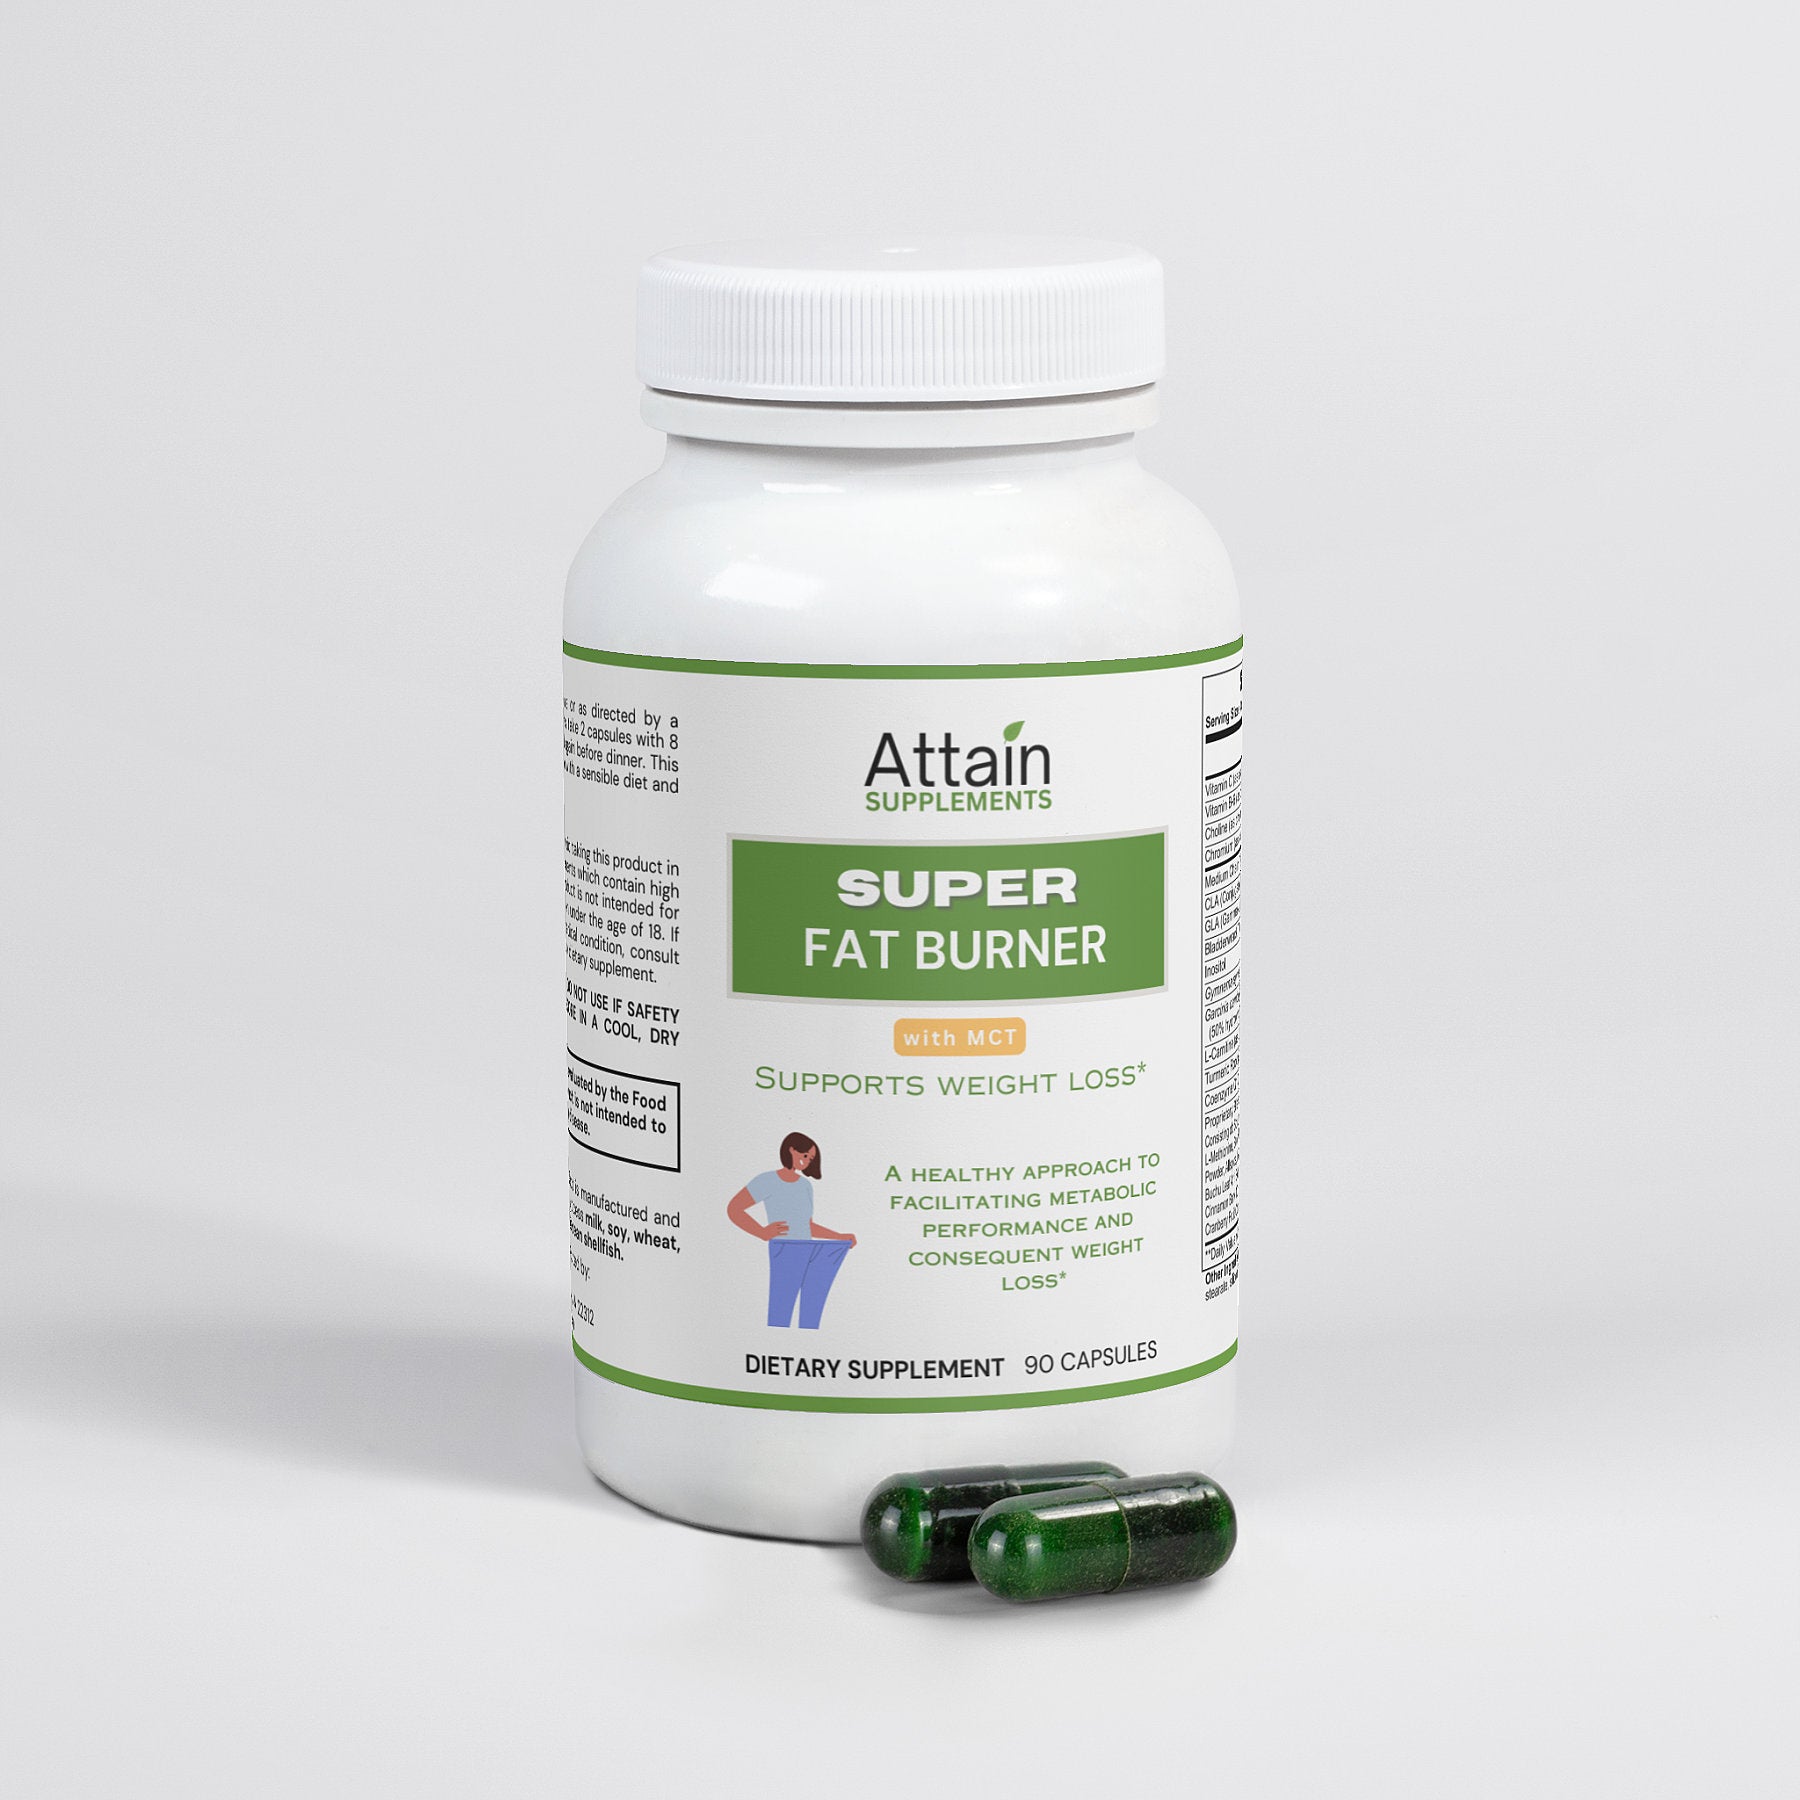 Super Fat Burner with MCT - Attain Supplements